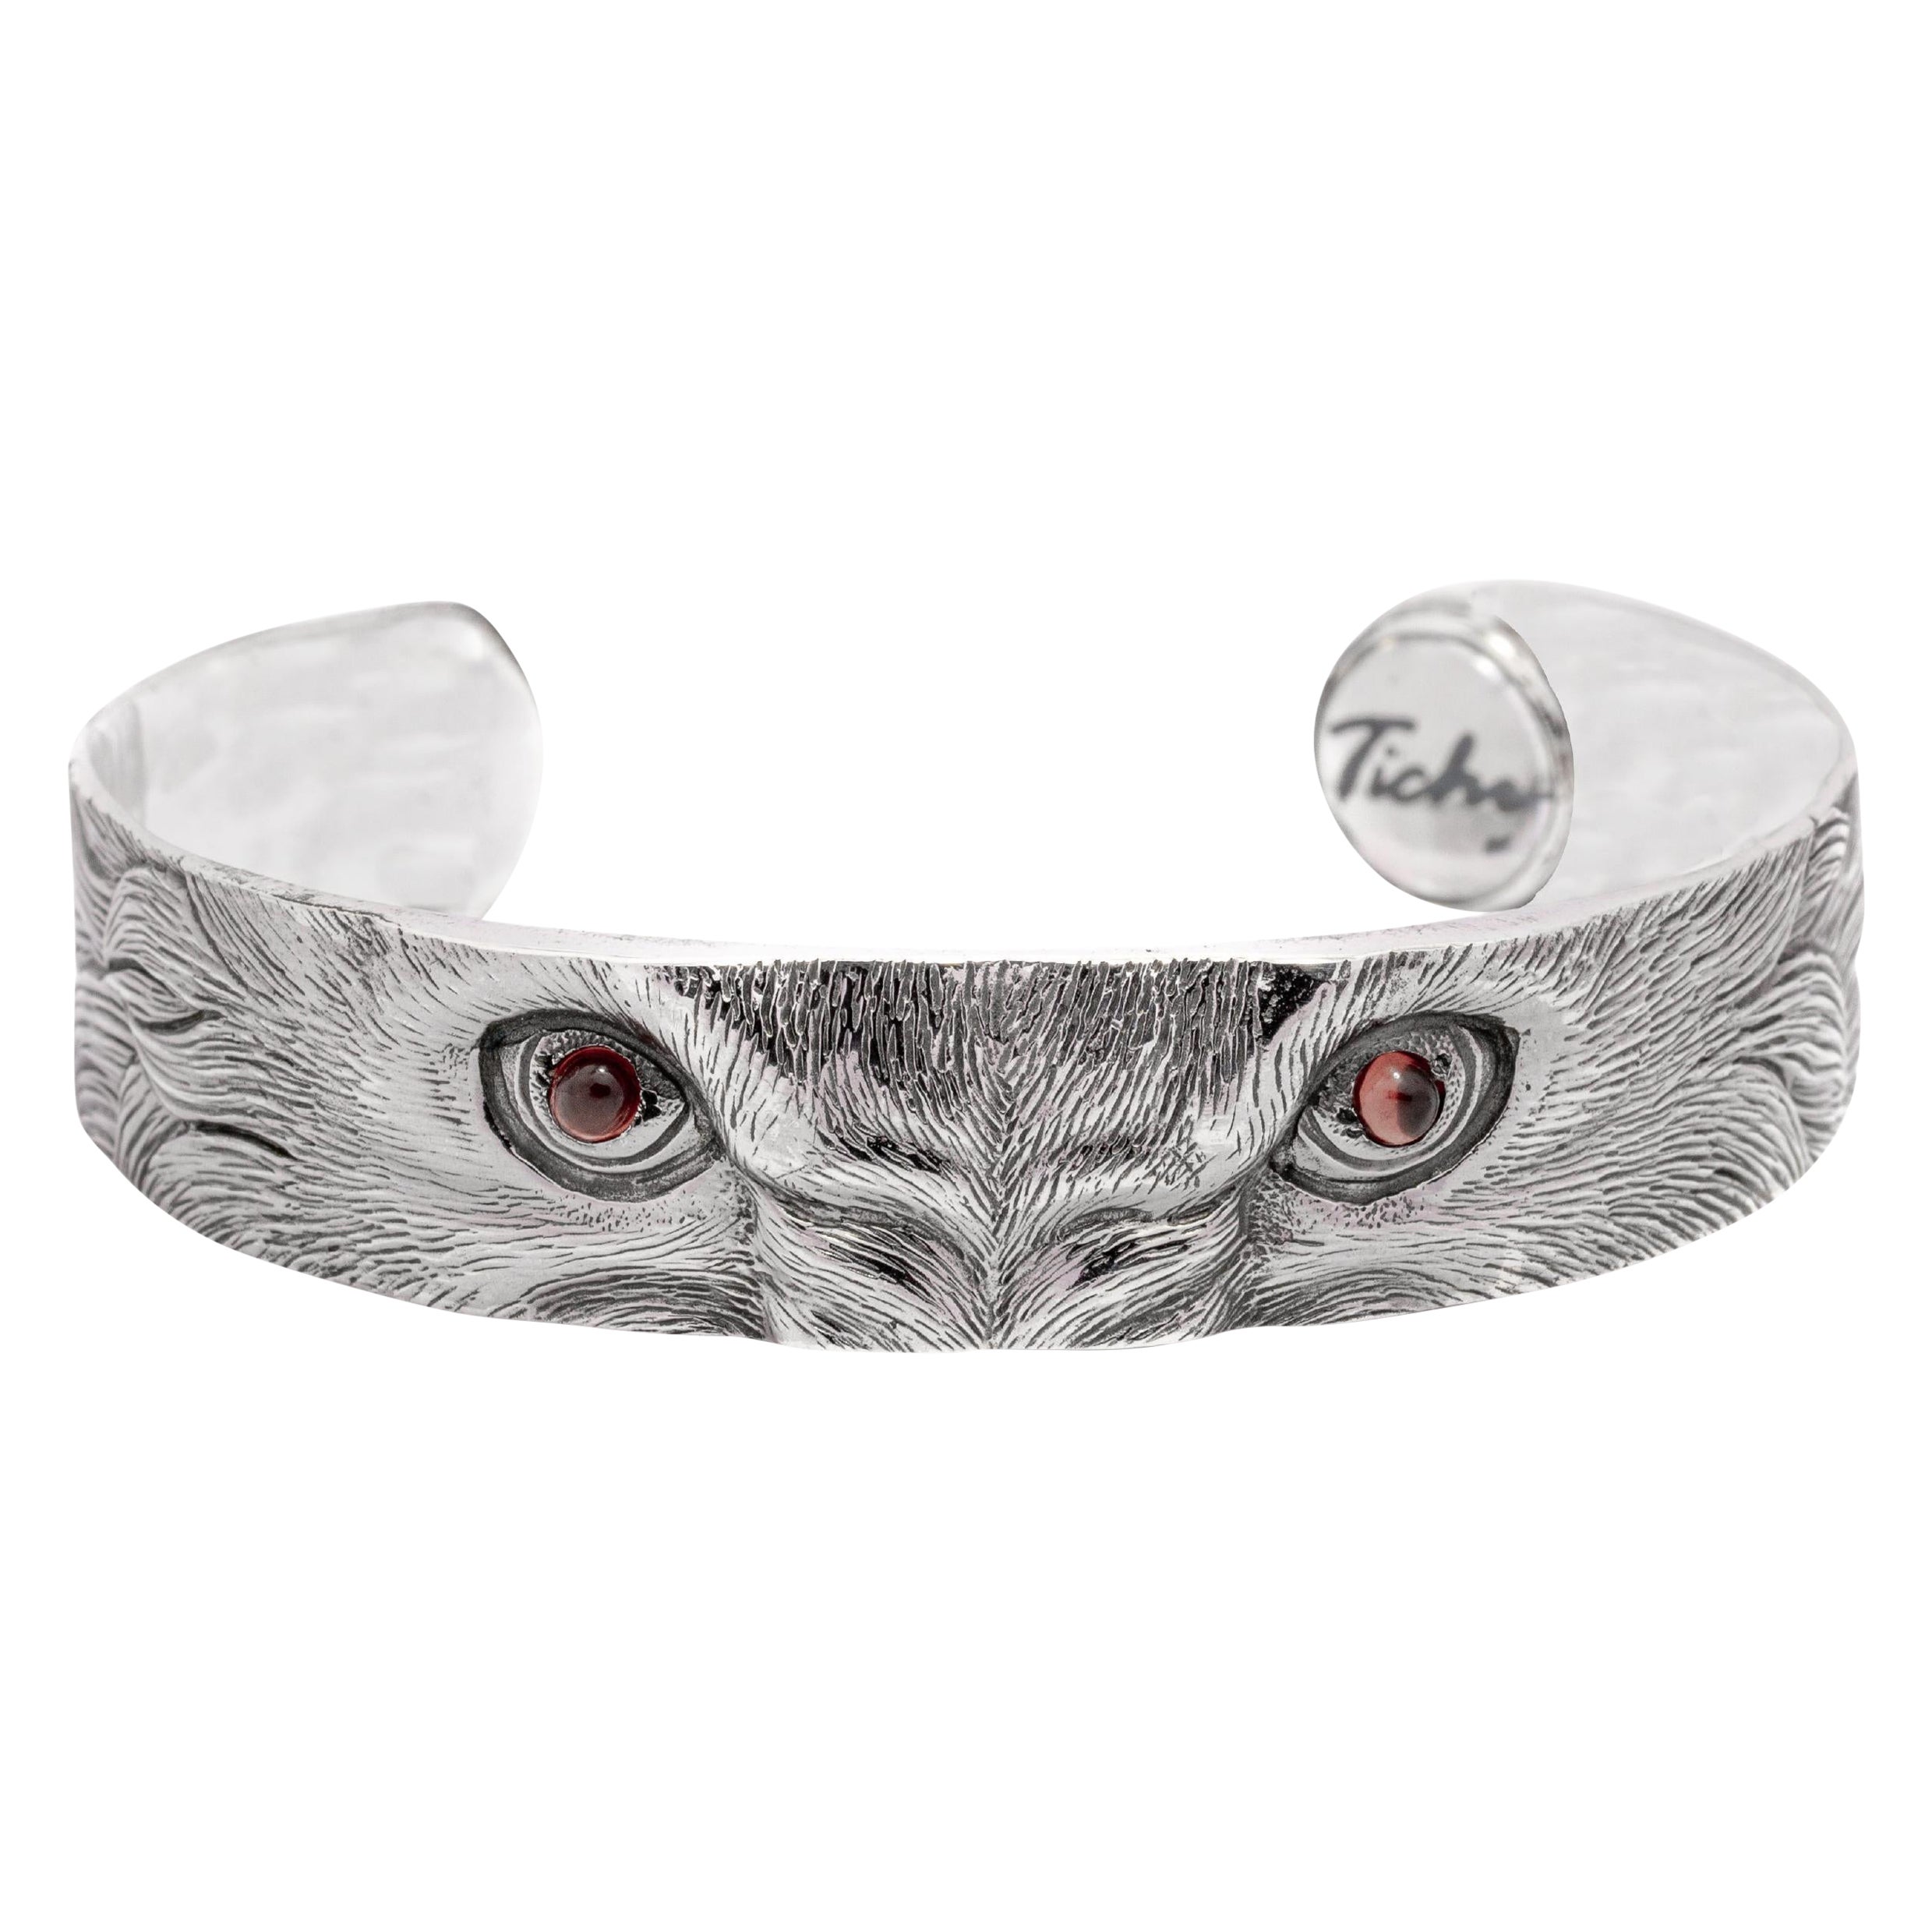 Tichu Citrine Lion Eyes Cuff in Sterling Silver and Crystal Quartz 'Size S' For Sale